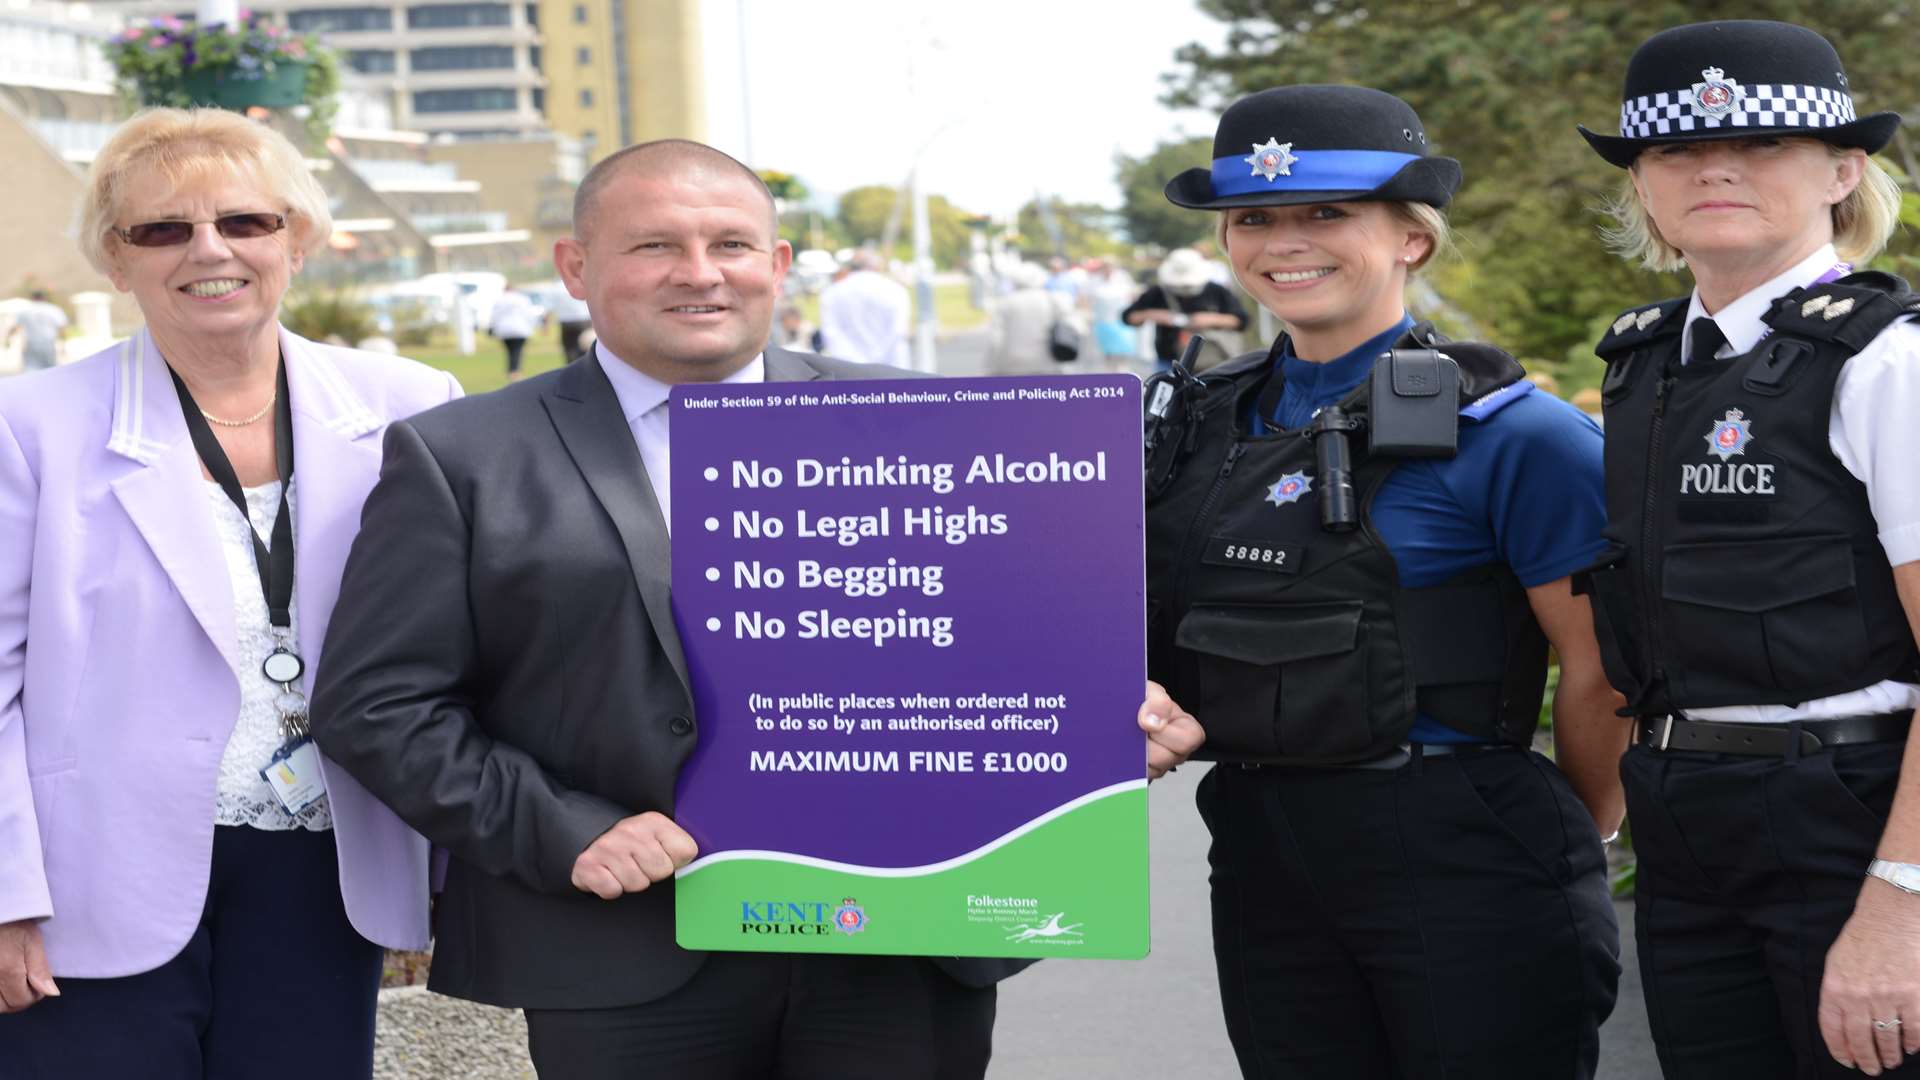 Jenny Hollingbee, Shaun Taylor, PCSO Sarah Leivers and acting inspector Emma Moloney from Kent Police with the new signs that will go up around Folkestone